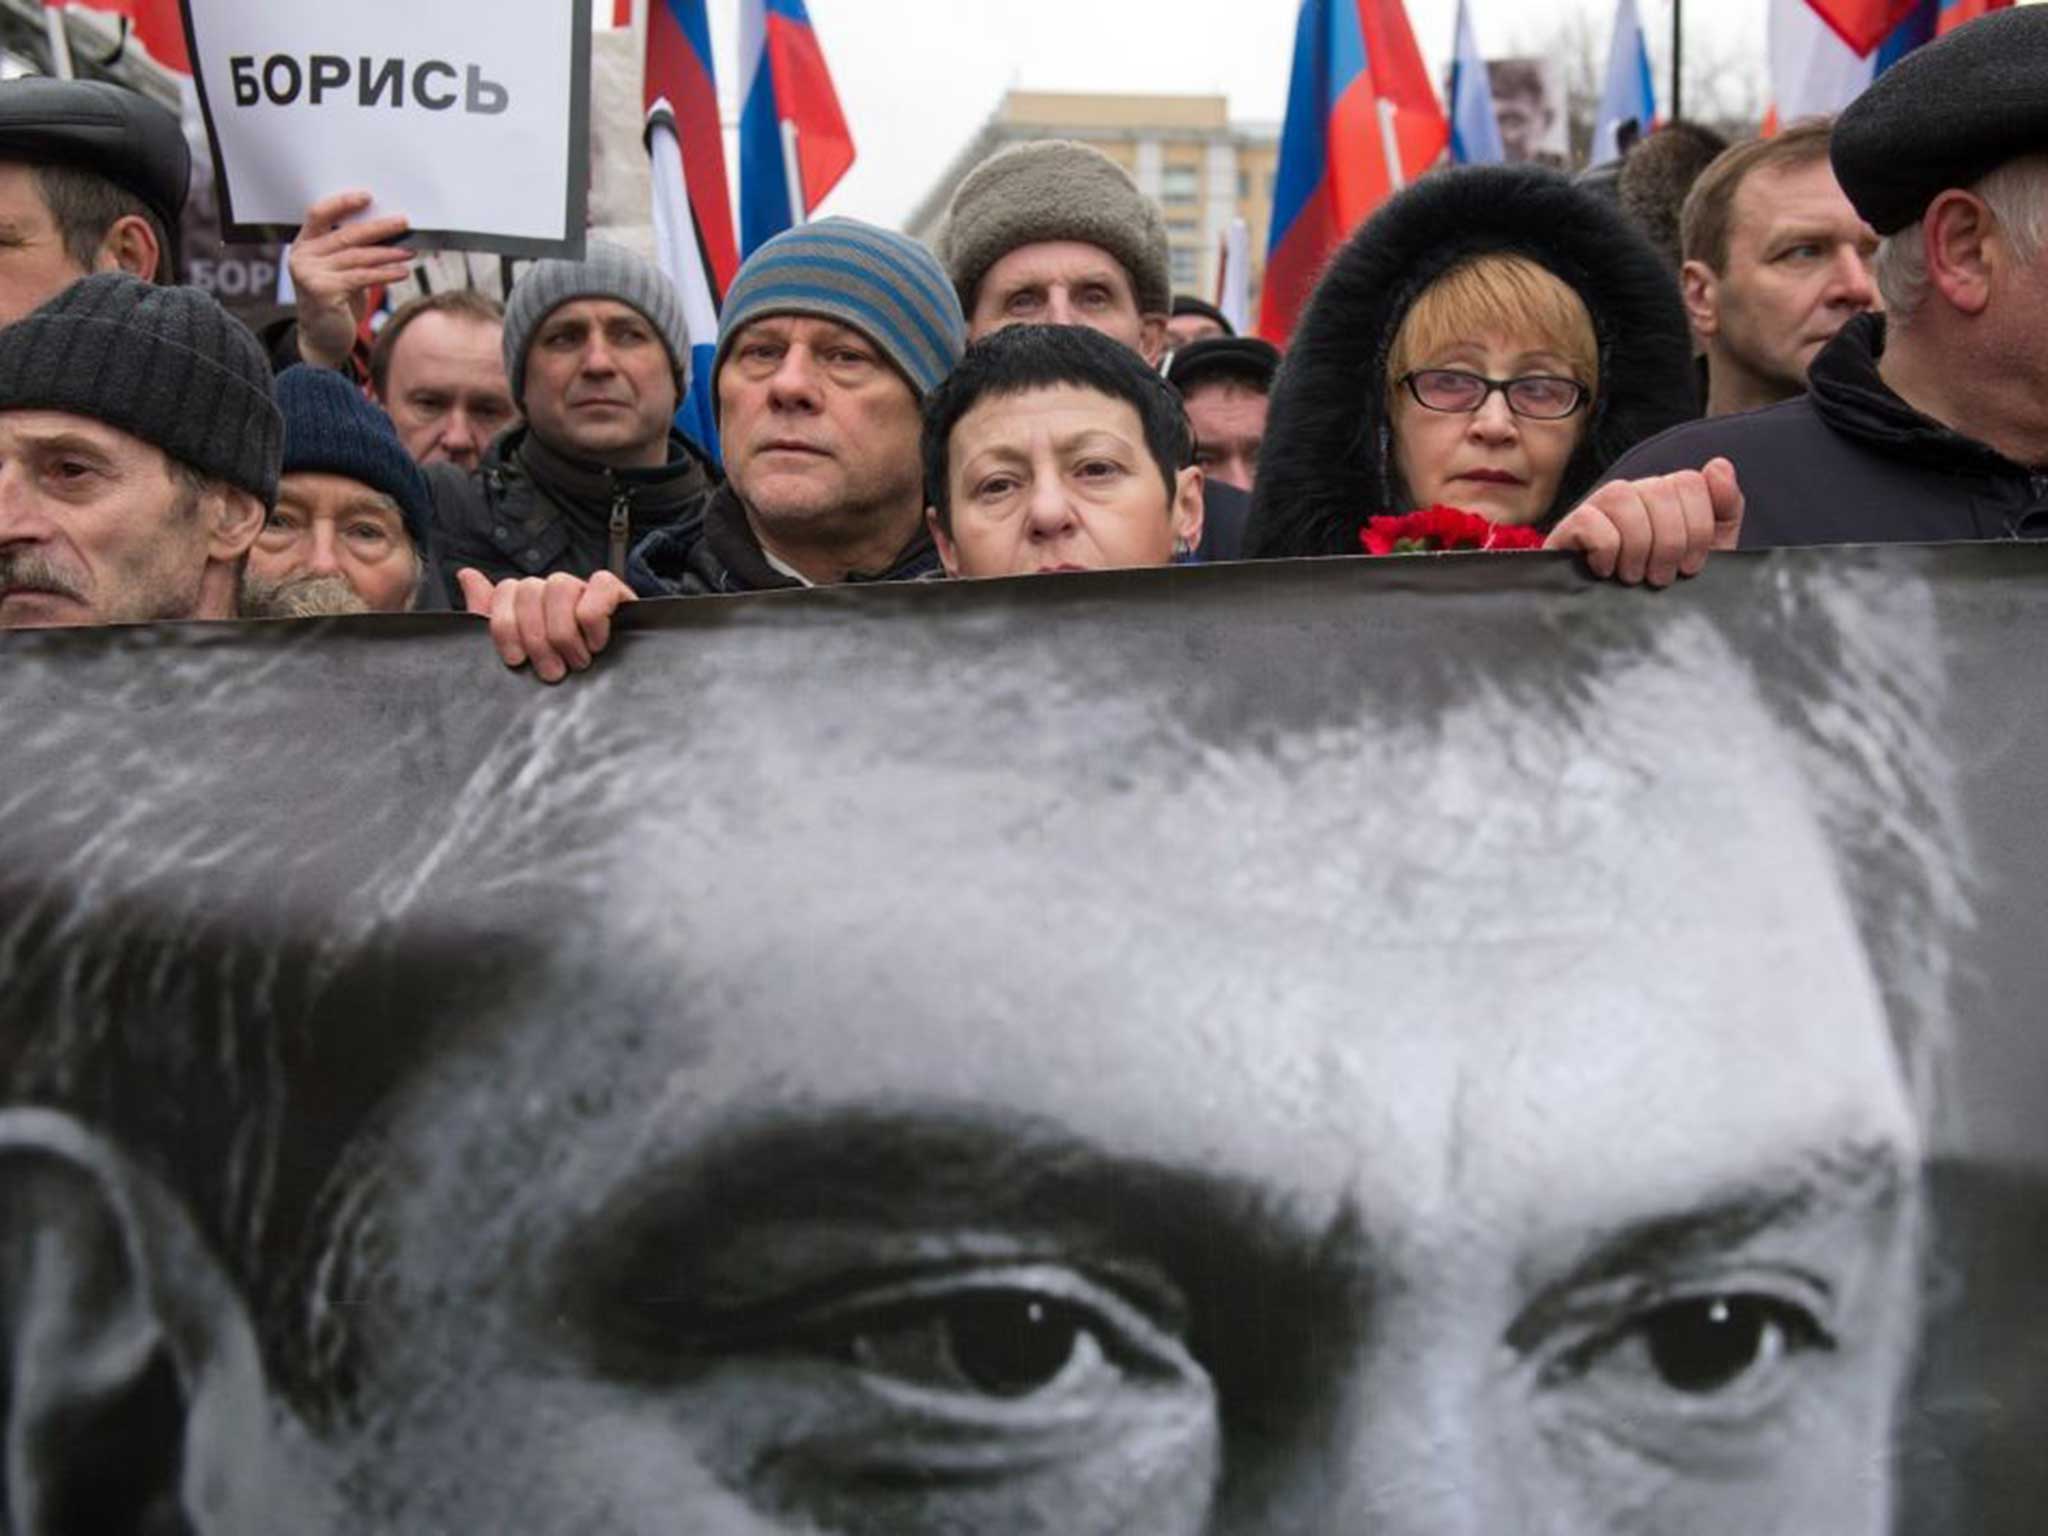 Protesters take to the streets in the days following Boris Nemtsov's murder